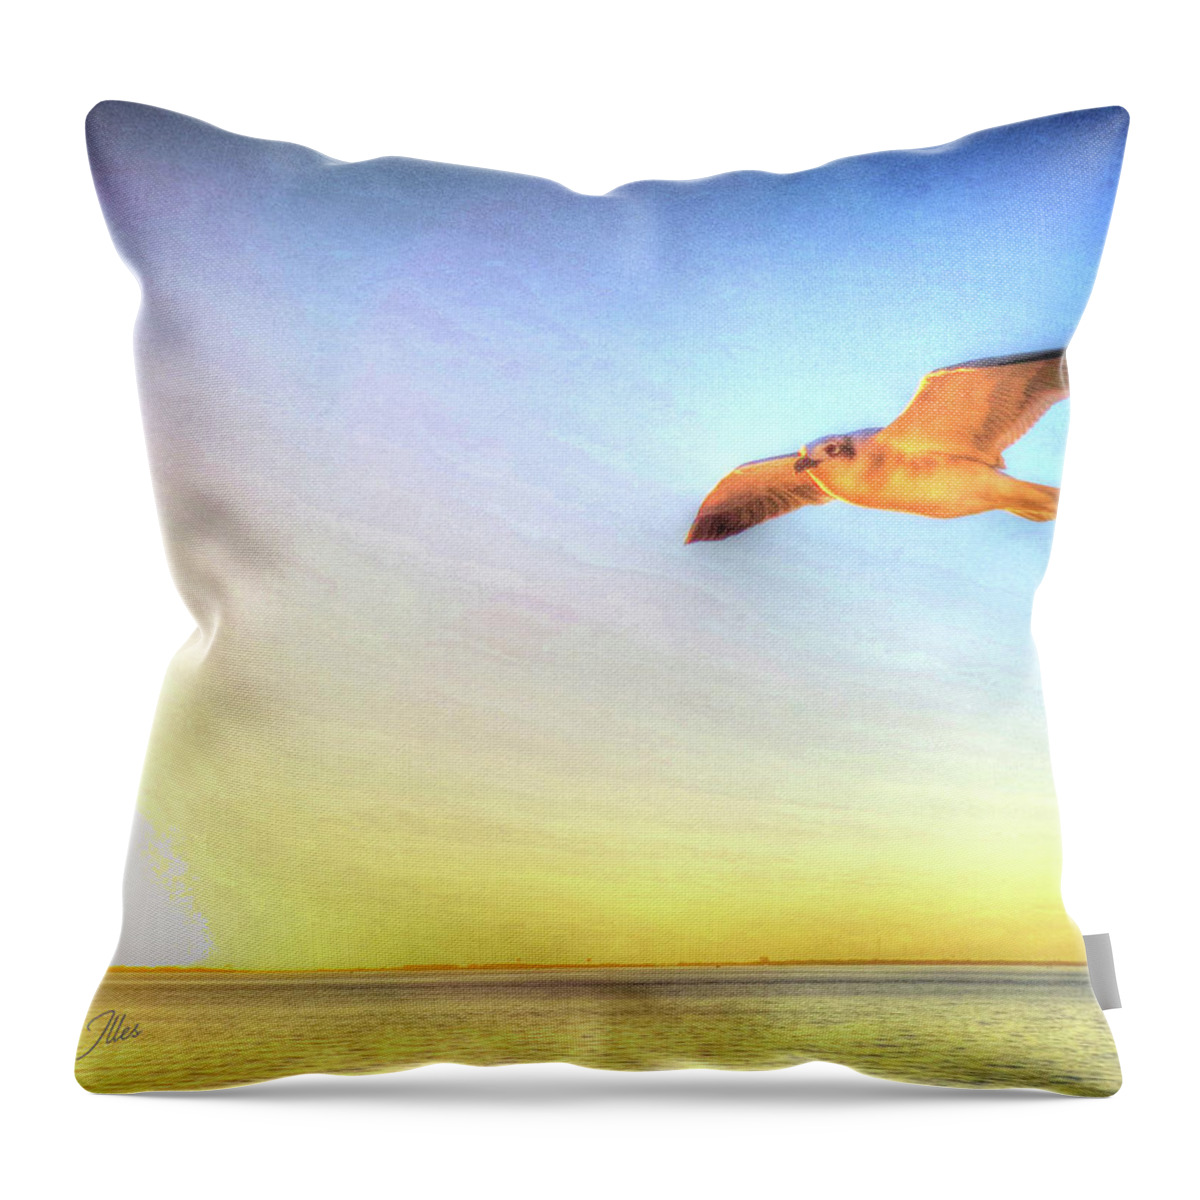 Gull Throw Pillow featuring the digital art Gull In Sky by Kathleen Illes